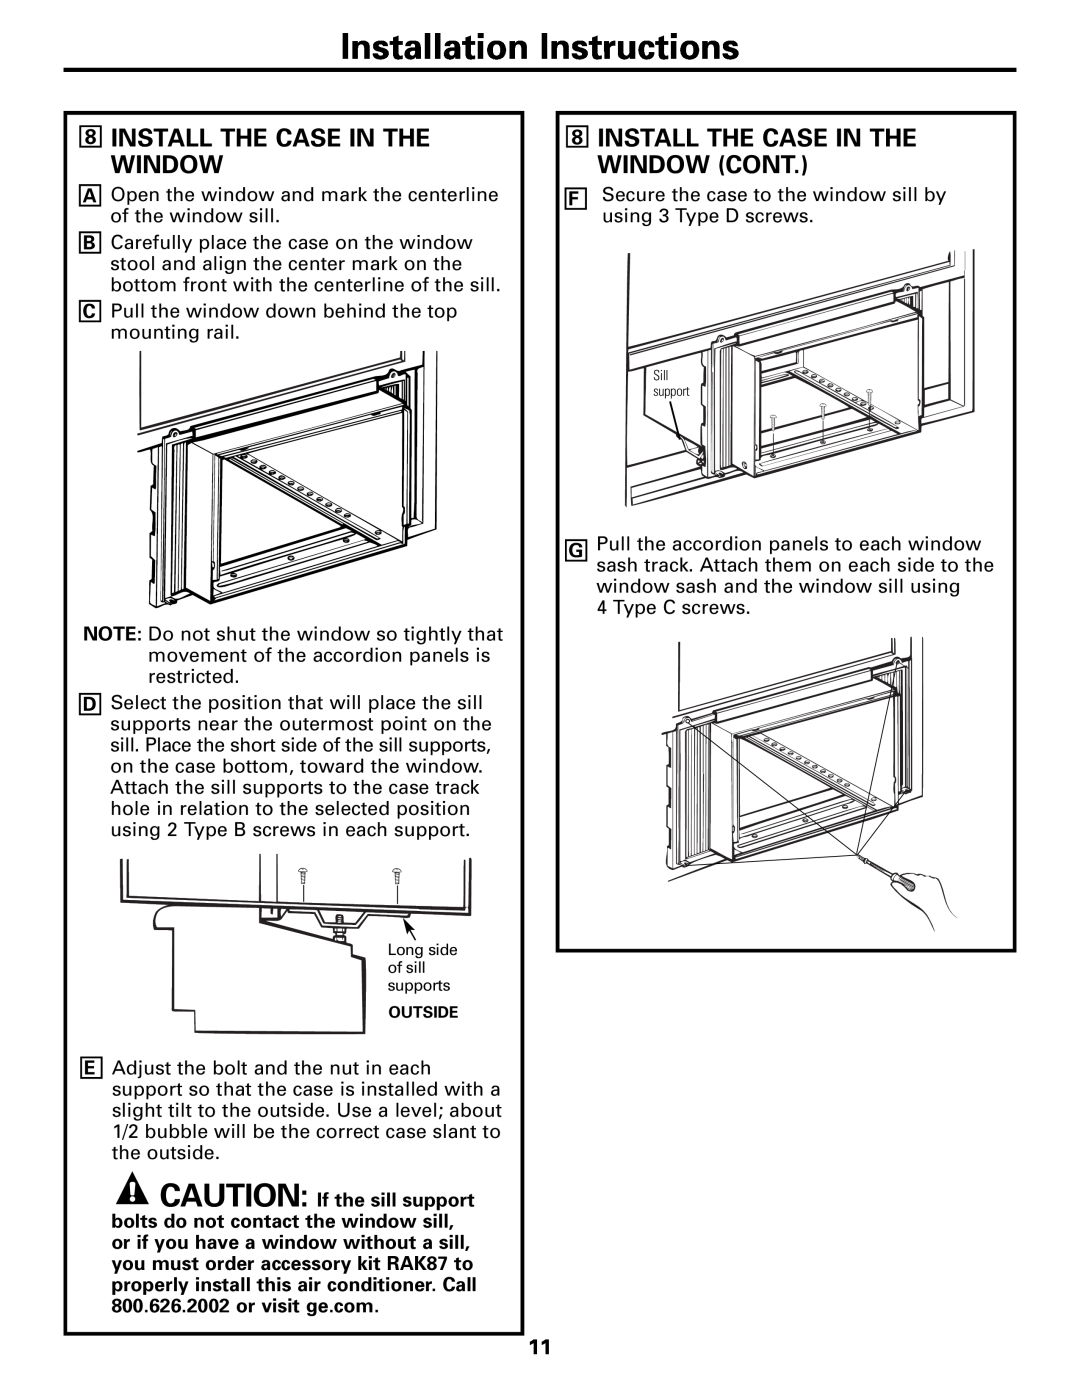 GE AEM10 owner manual Install The Case In The Window Cont, Installation Instructions 